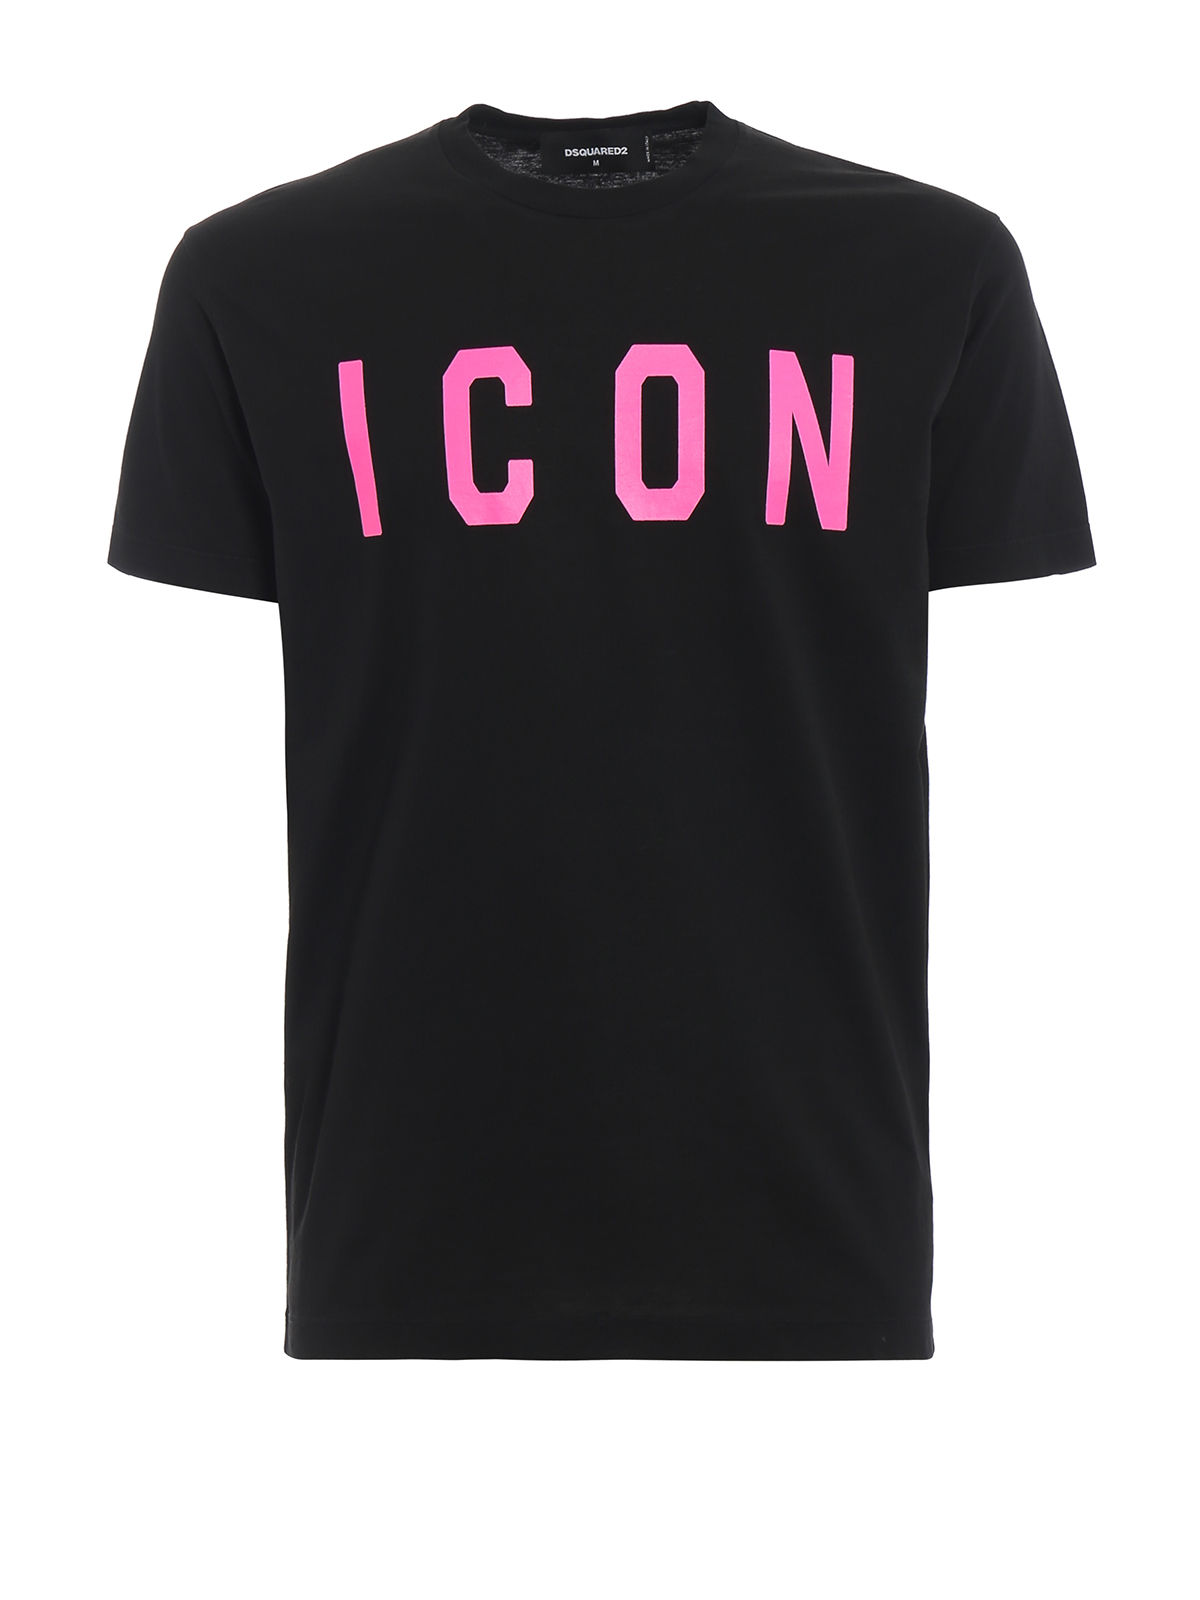 Icon Shirt at Vectorified.com | Collection of Icon Shirt free for ...